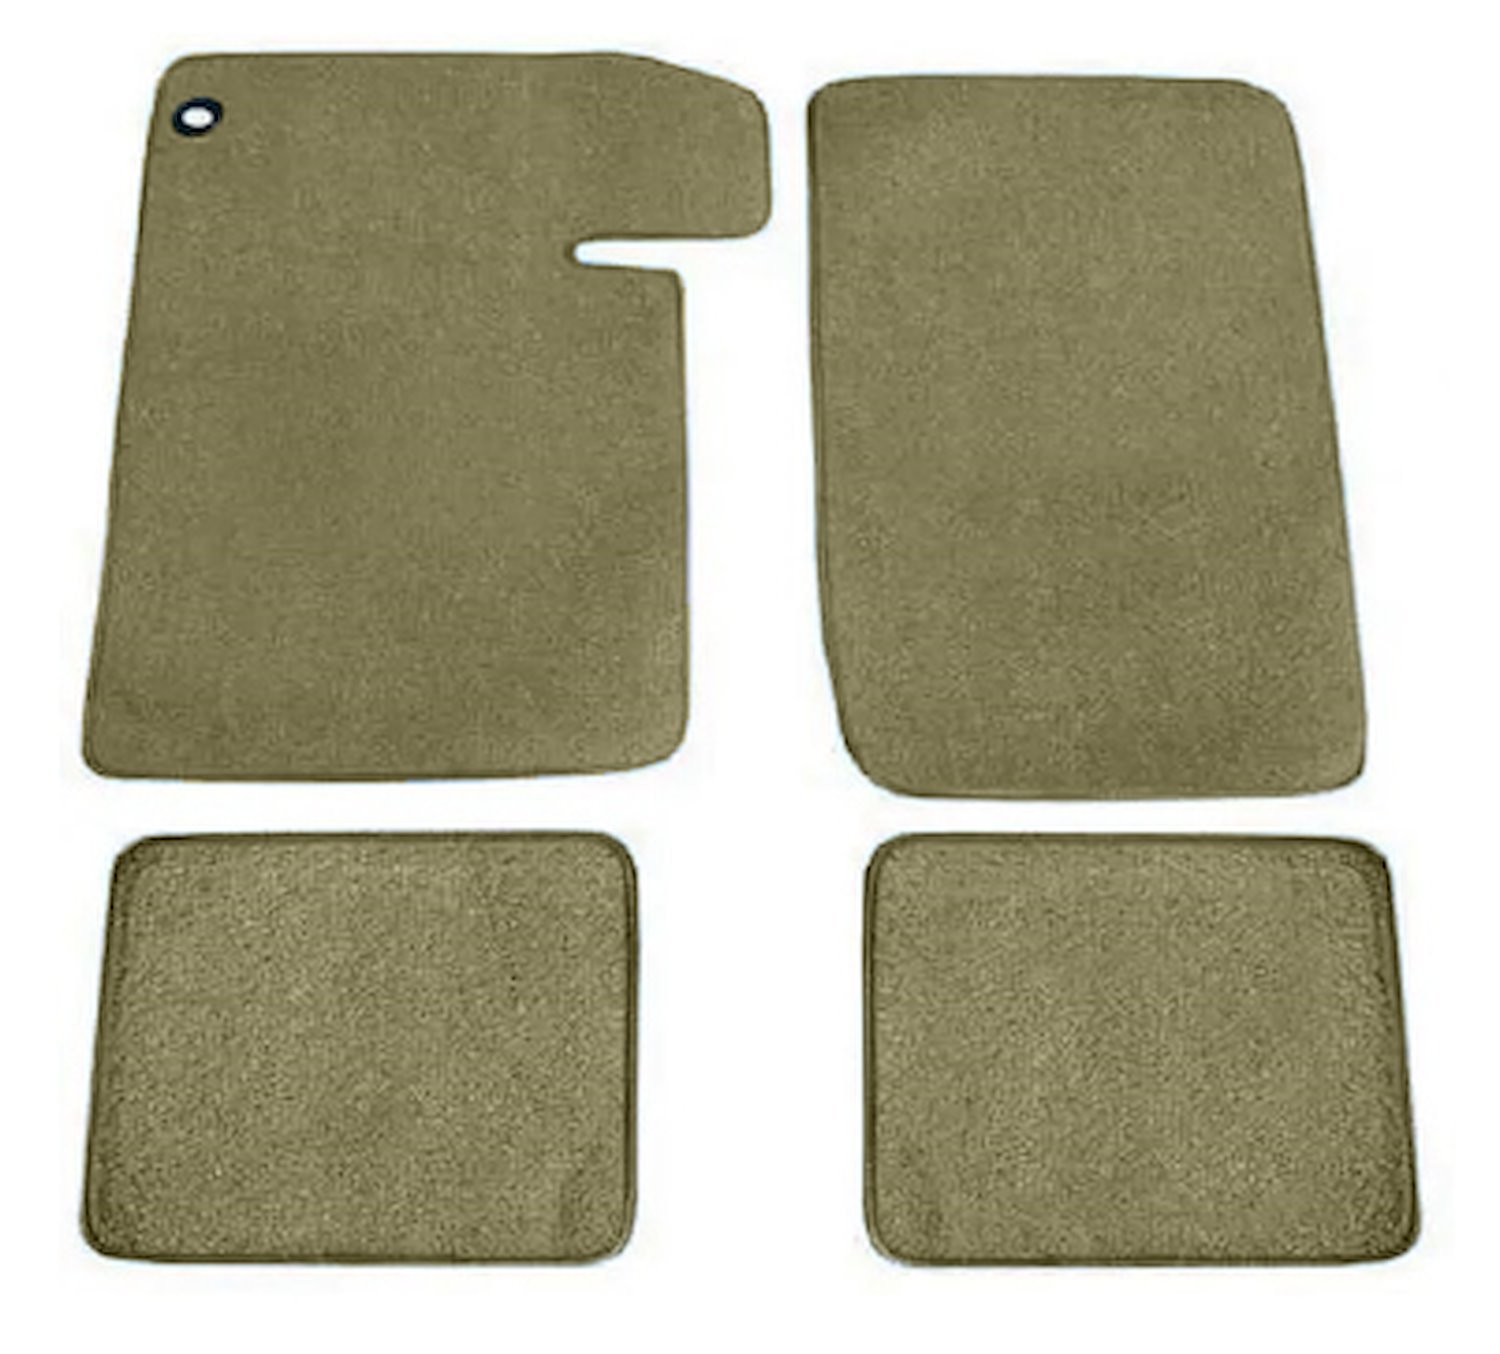 Molded Loop Floor Mats Fits Select 1964-1967 Buick, Chevrolet, Oldsmobile, Pontiac Models [4-Piece, Fawn]